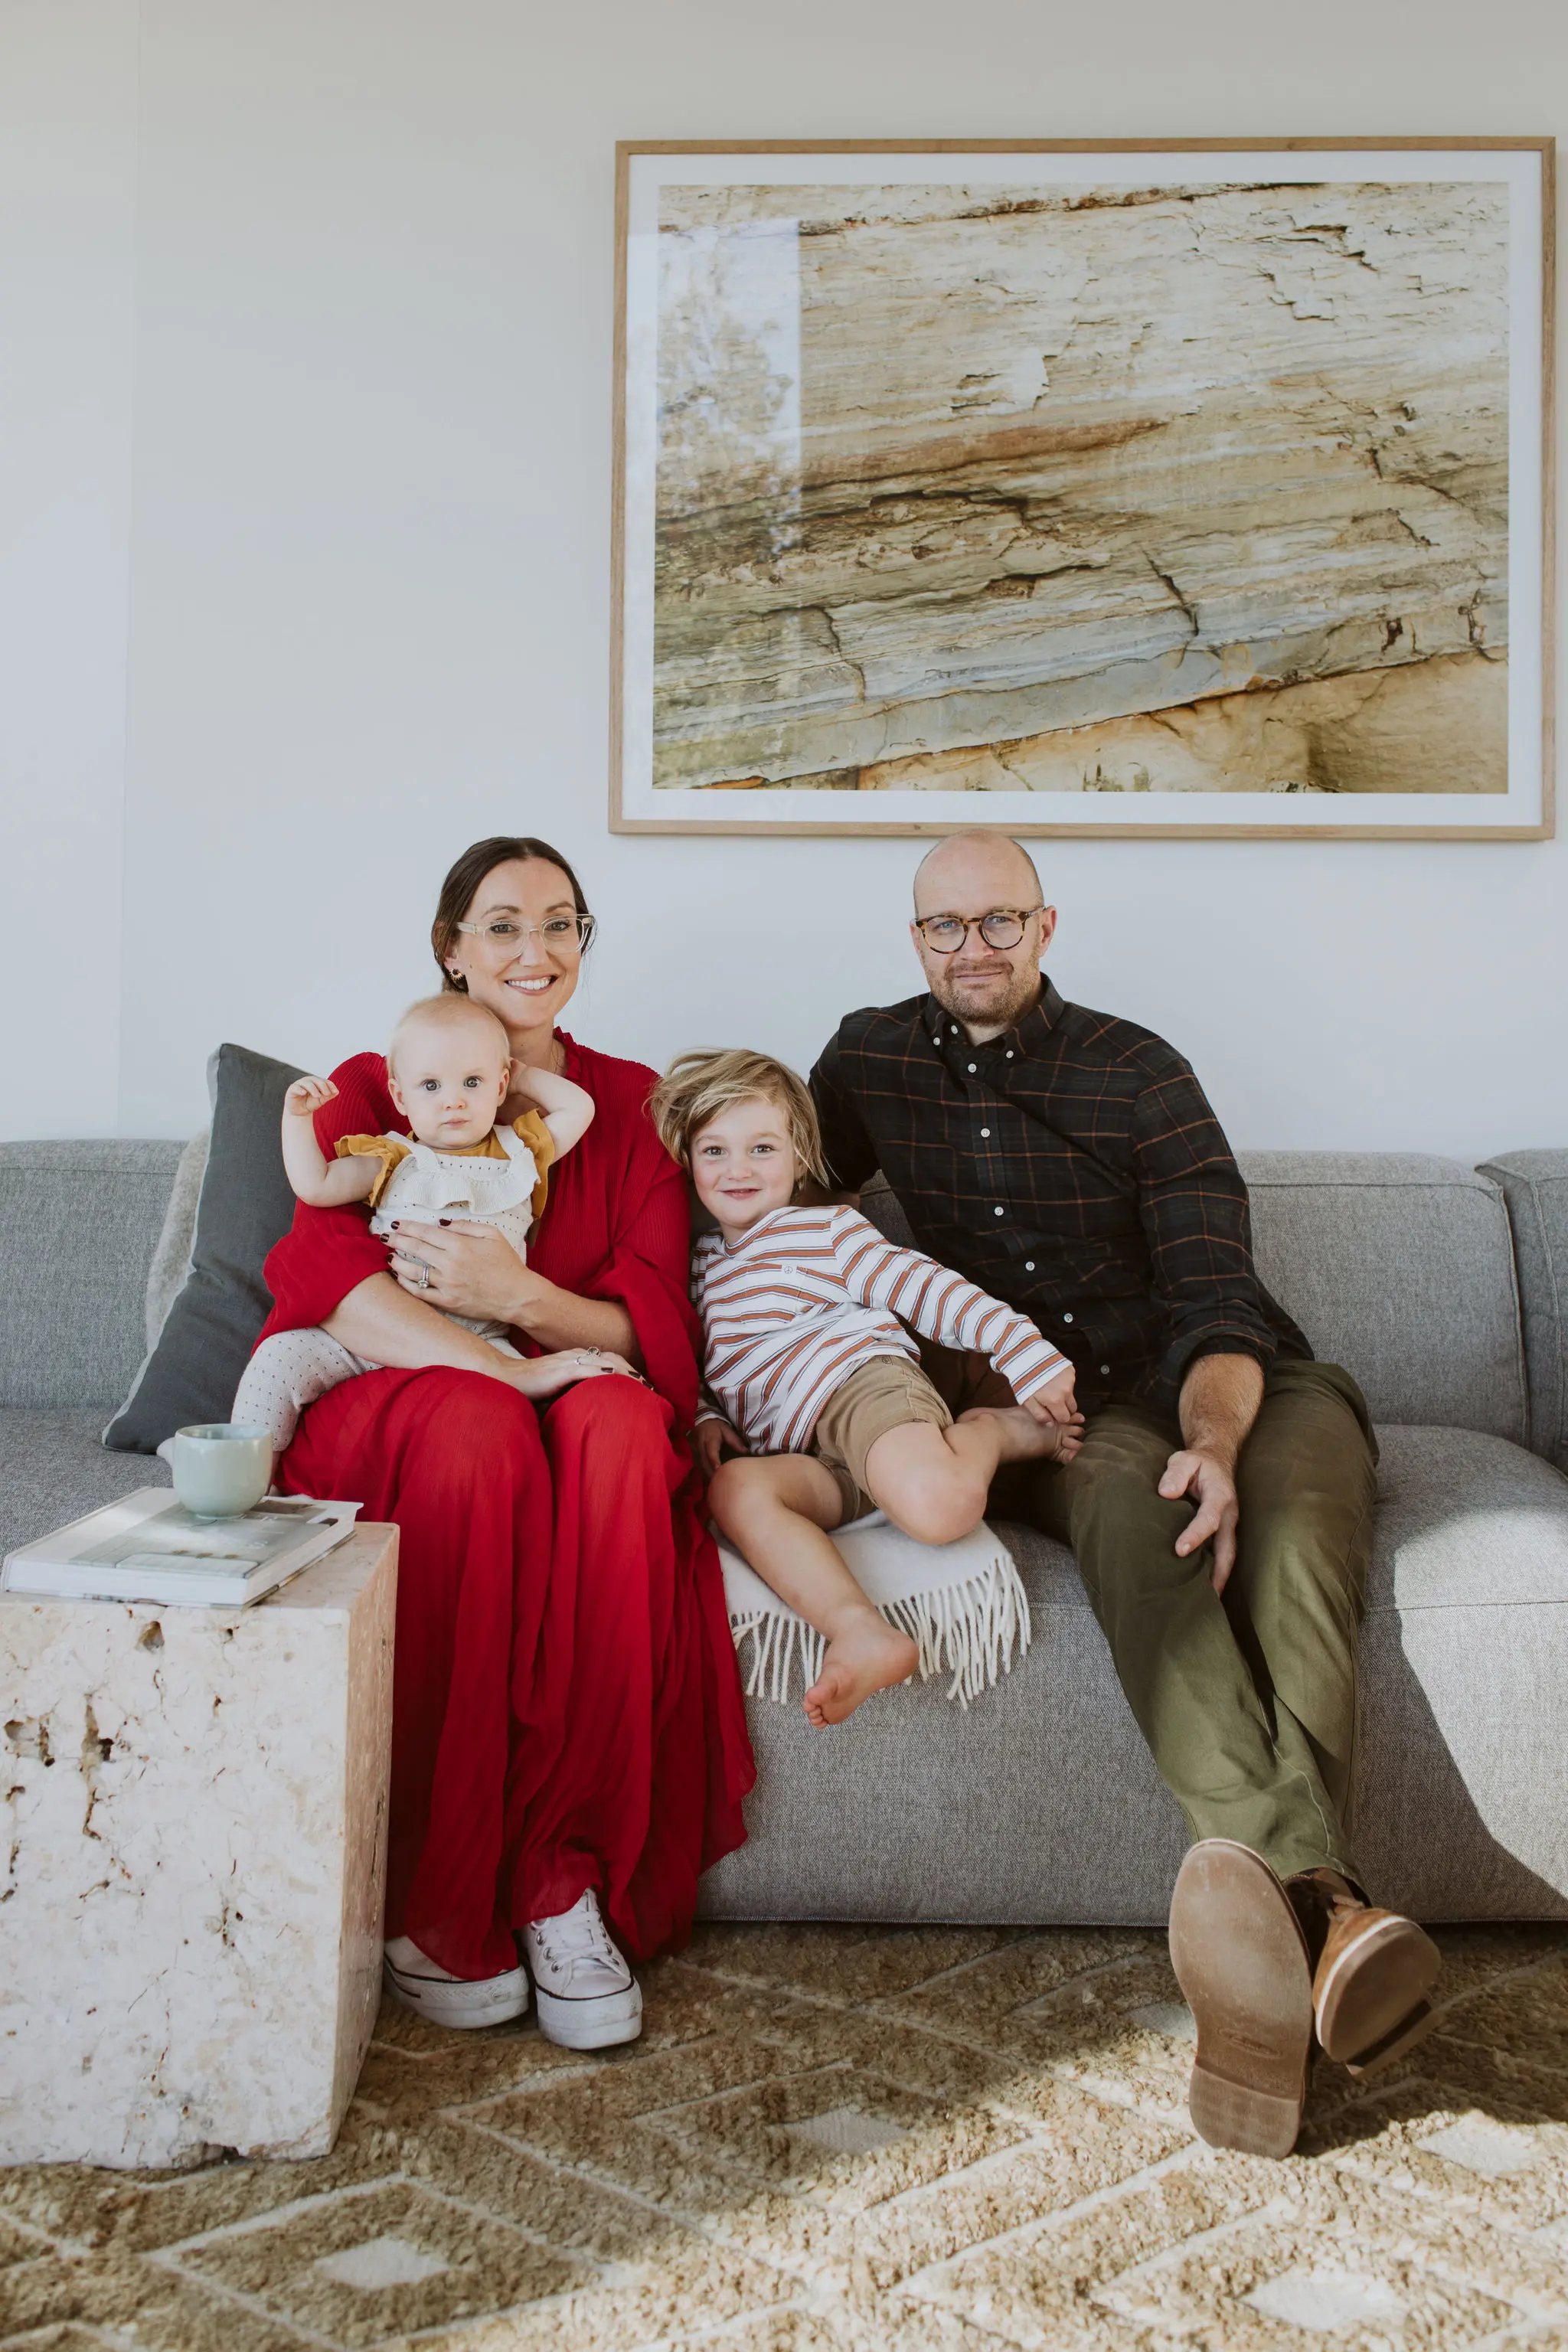 Alex and Corbans' family sitting on a couch, among their design